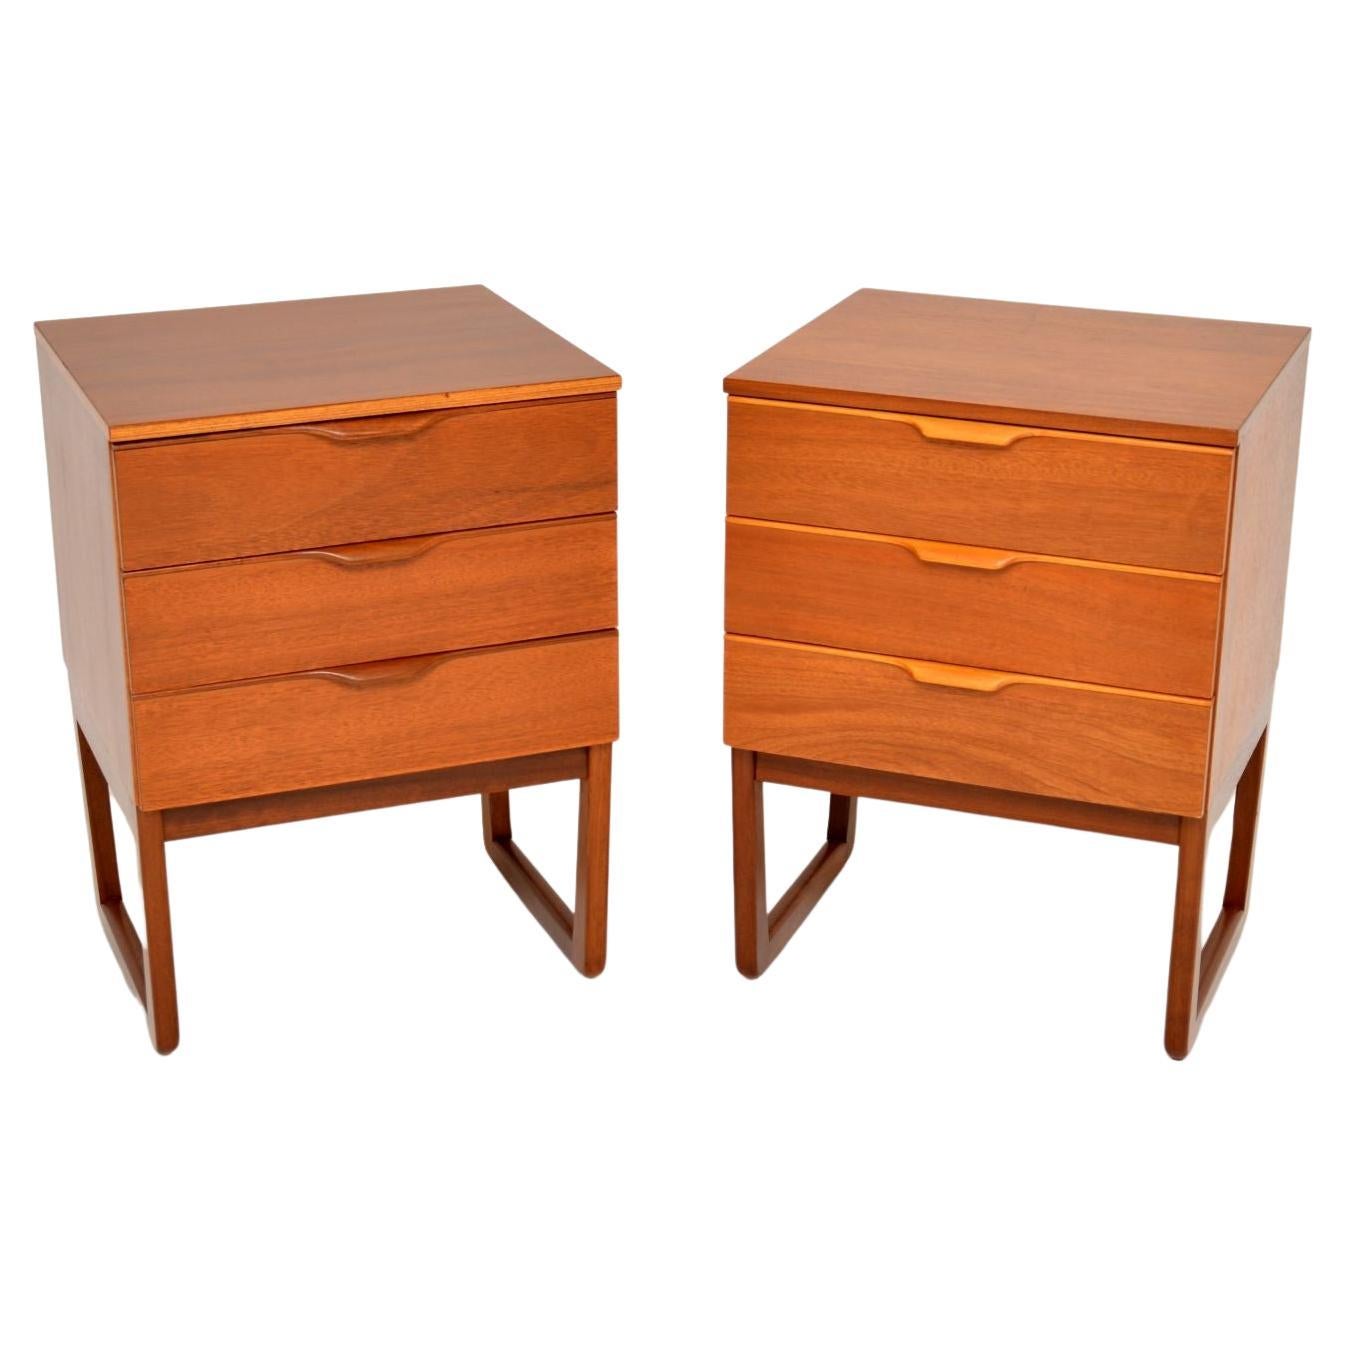 1960's Pair of Vintage Wooden Bedside Chests